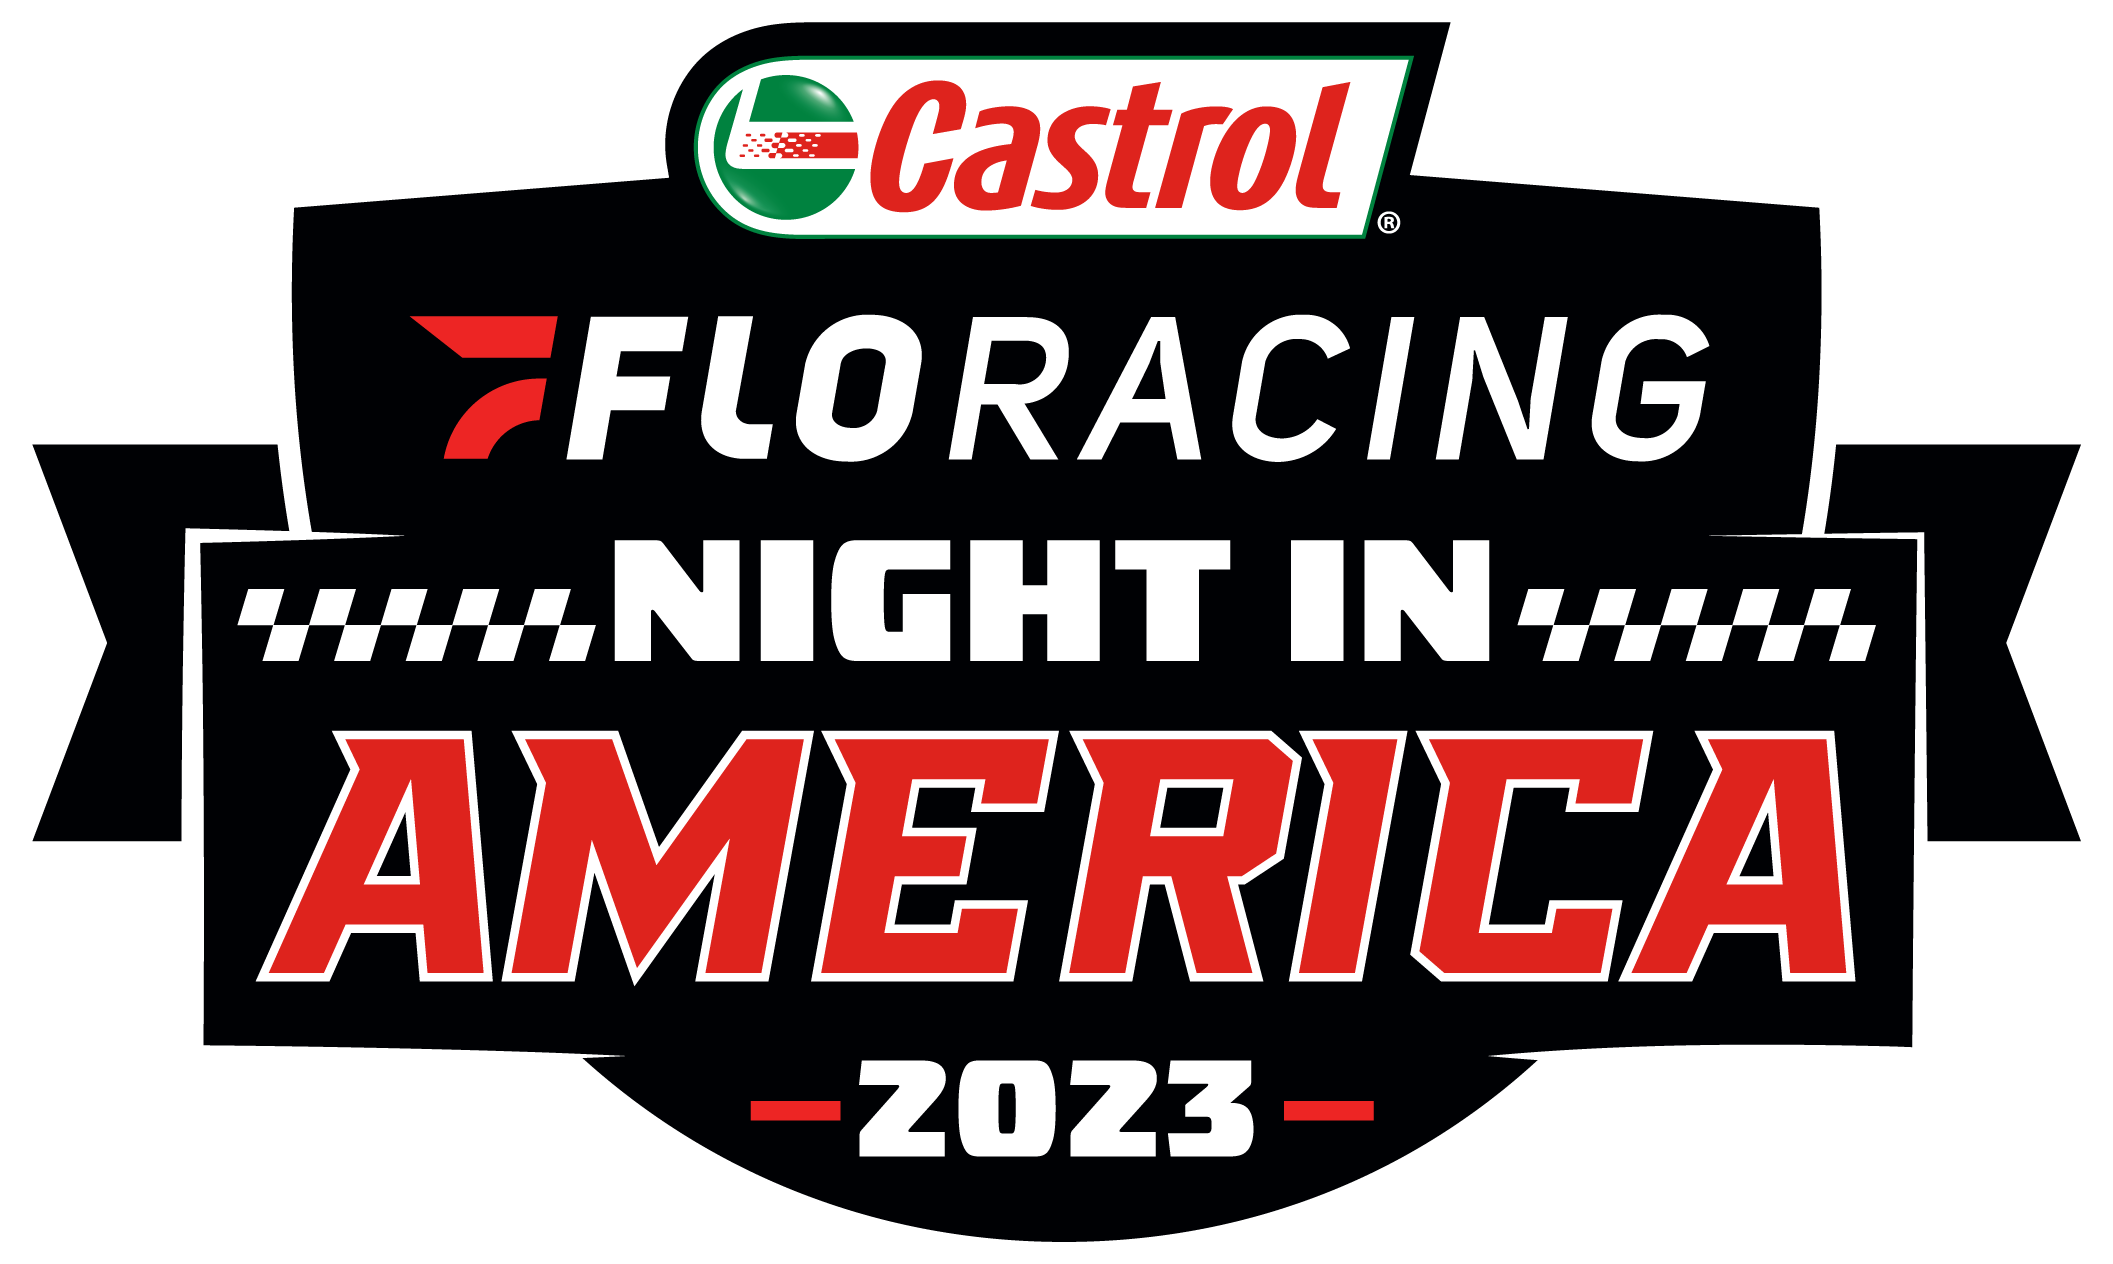 Special Wednesday event this week as the Castrol Floracing Night in